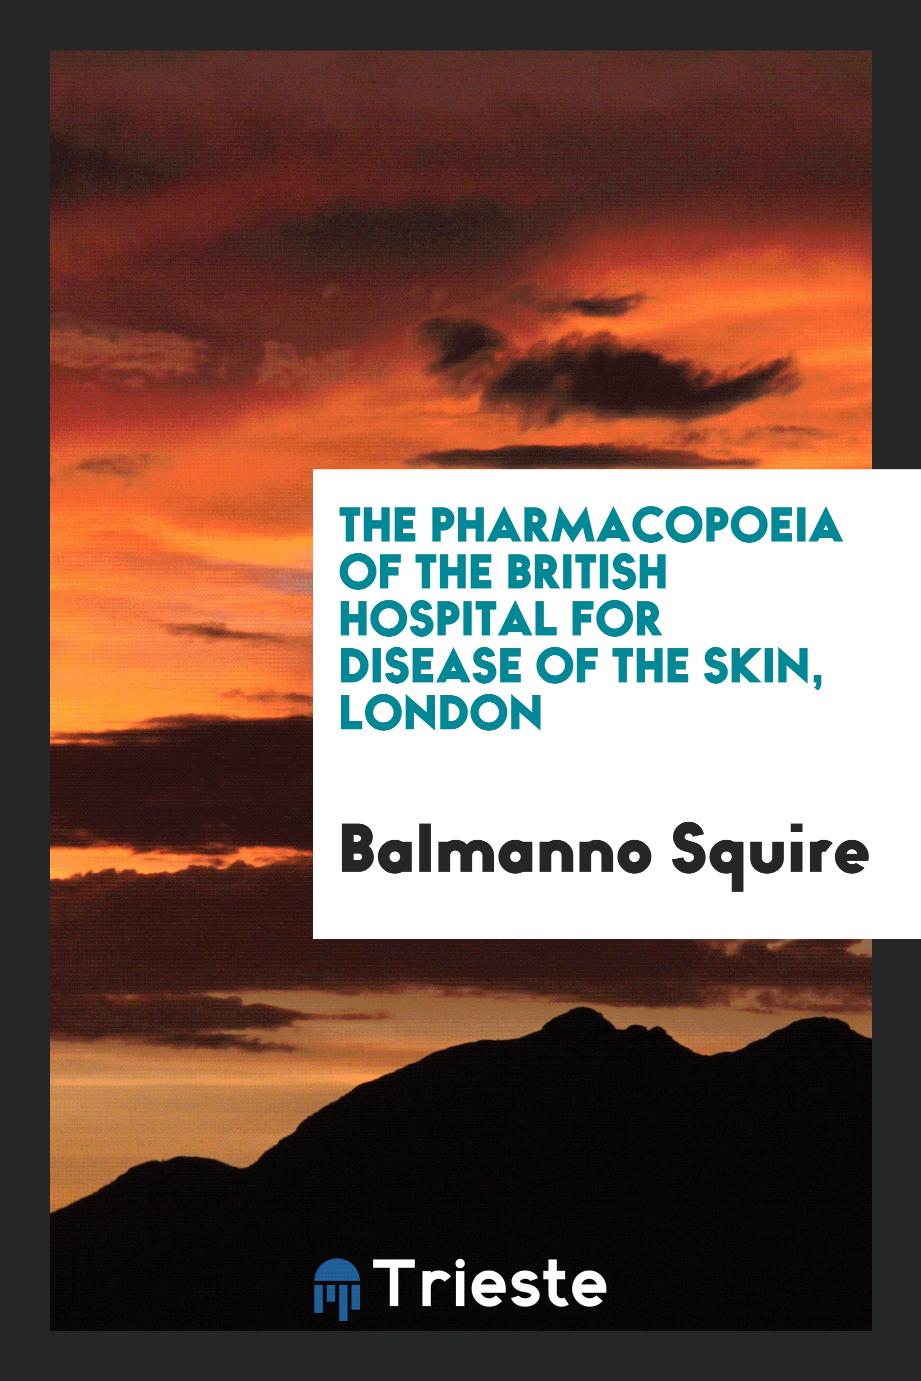 The Pharmacopoeia of the British Hospital for Disease of the Skin, London